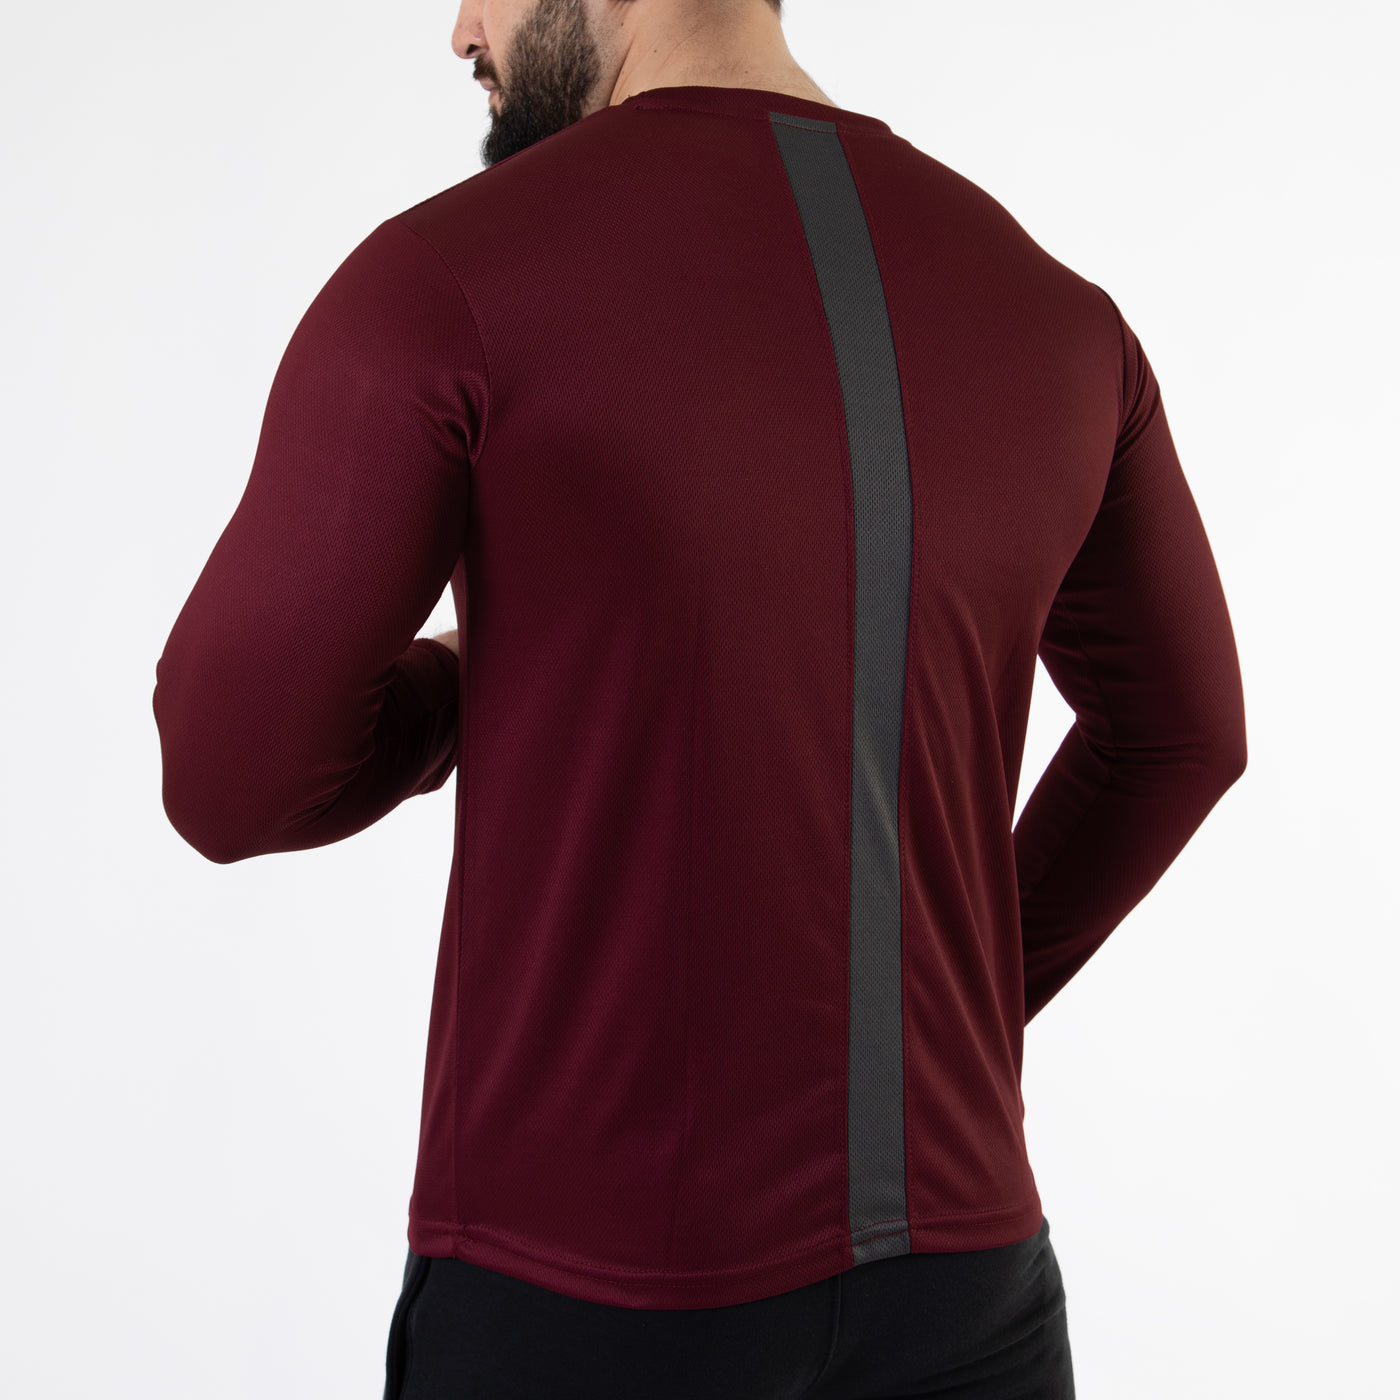 Maroon Mesh Full Sleeves T-Shirt with Back Gray Panel